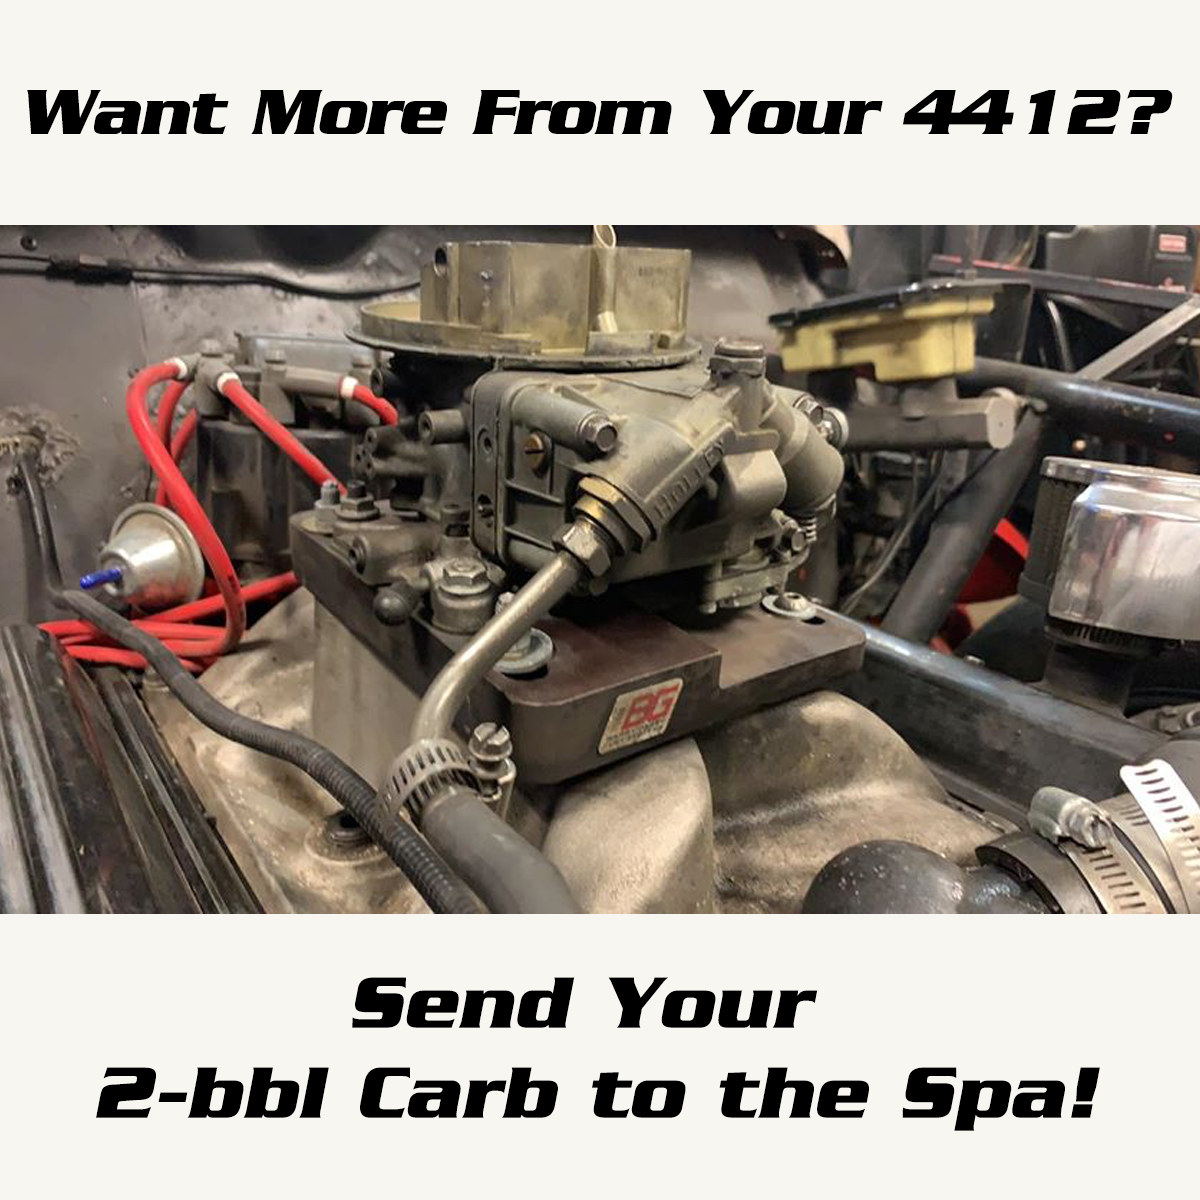 2bbl Holly 4412 Carb Spa and Rebuild